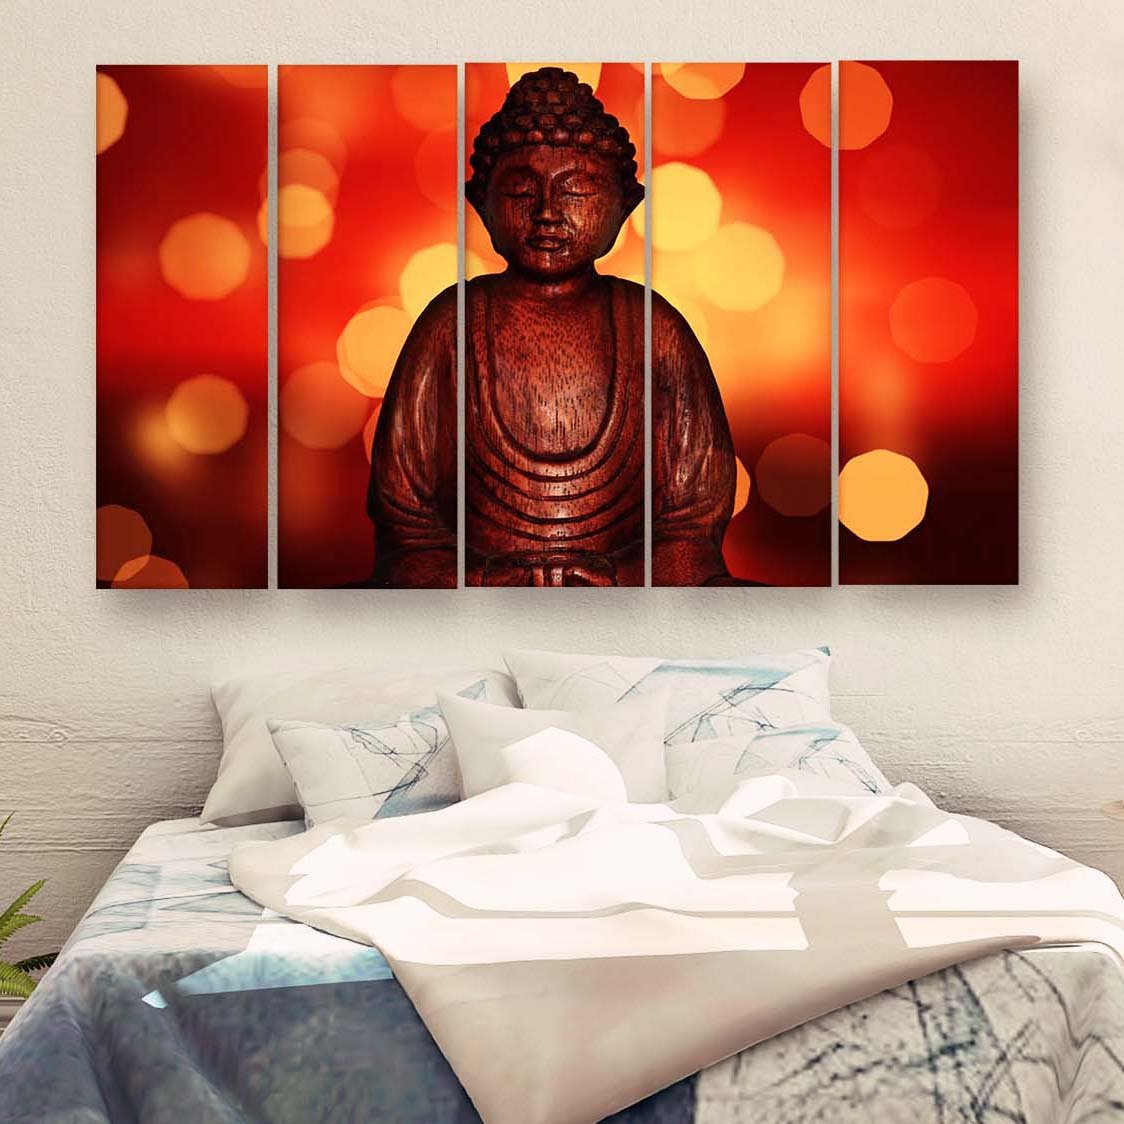 Casperme Buddha Wall Painting For Living Room for Bedroom, Hotels & Office Decoration (48W x 30H inches) Casper_HD_MF_402